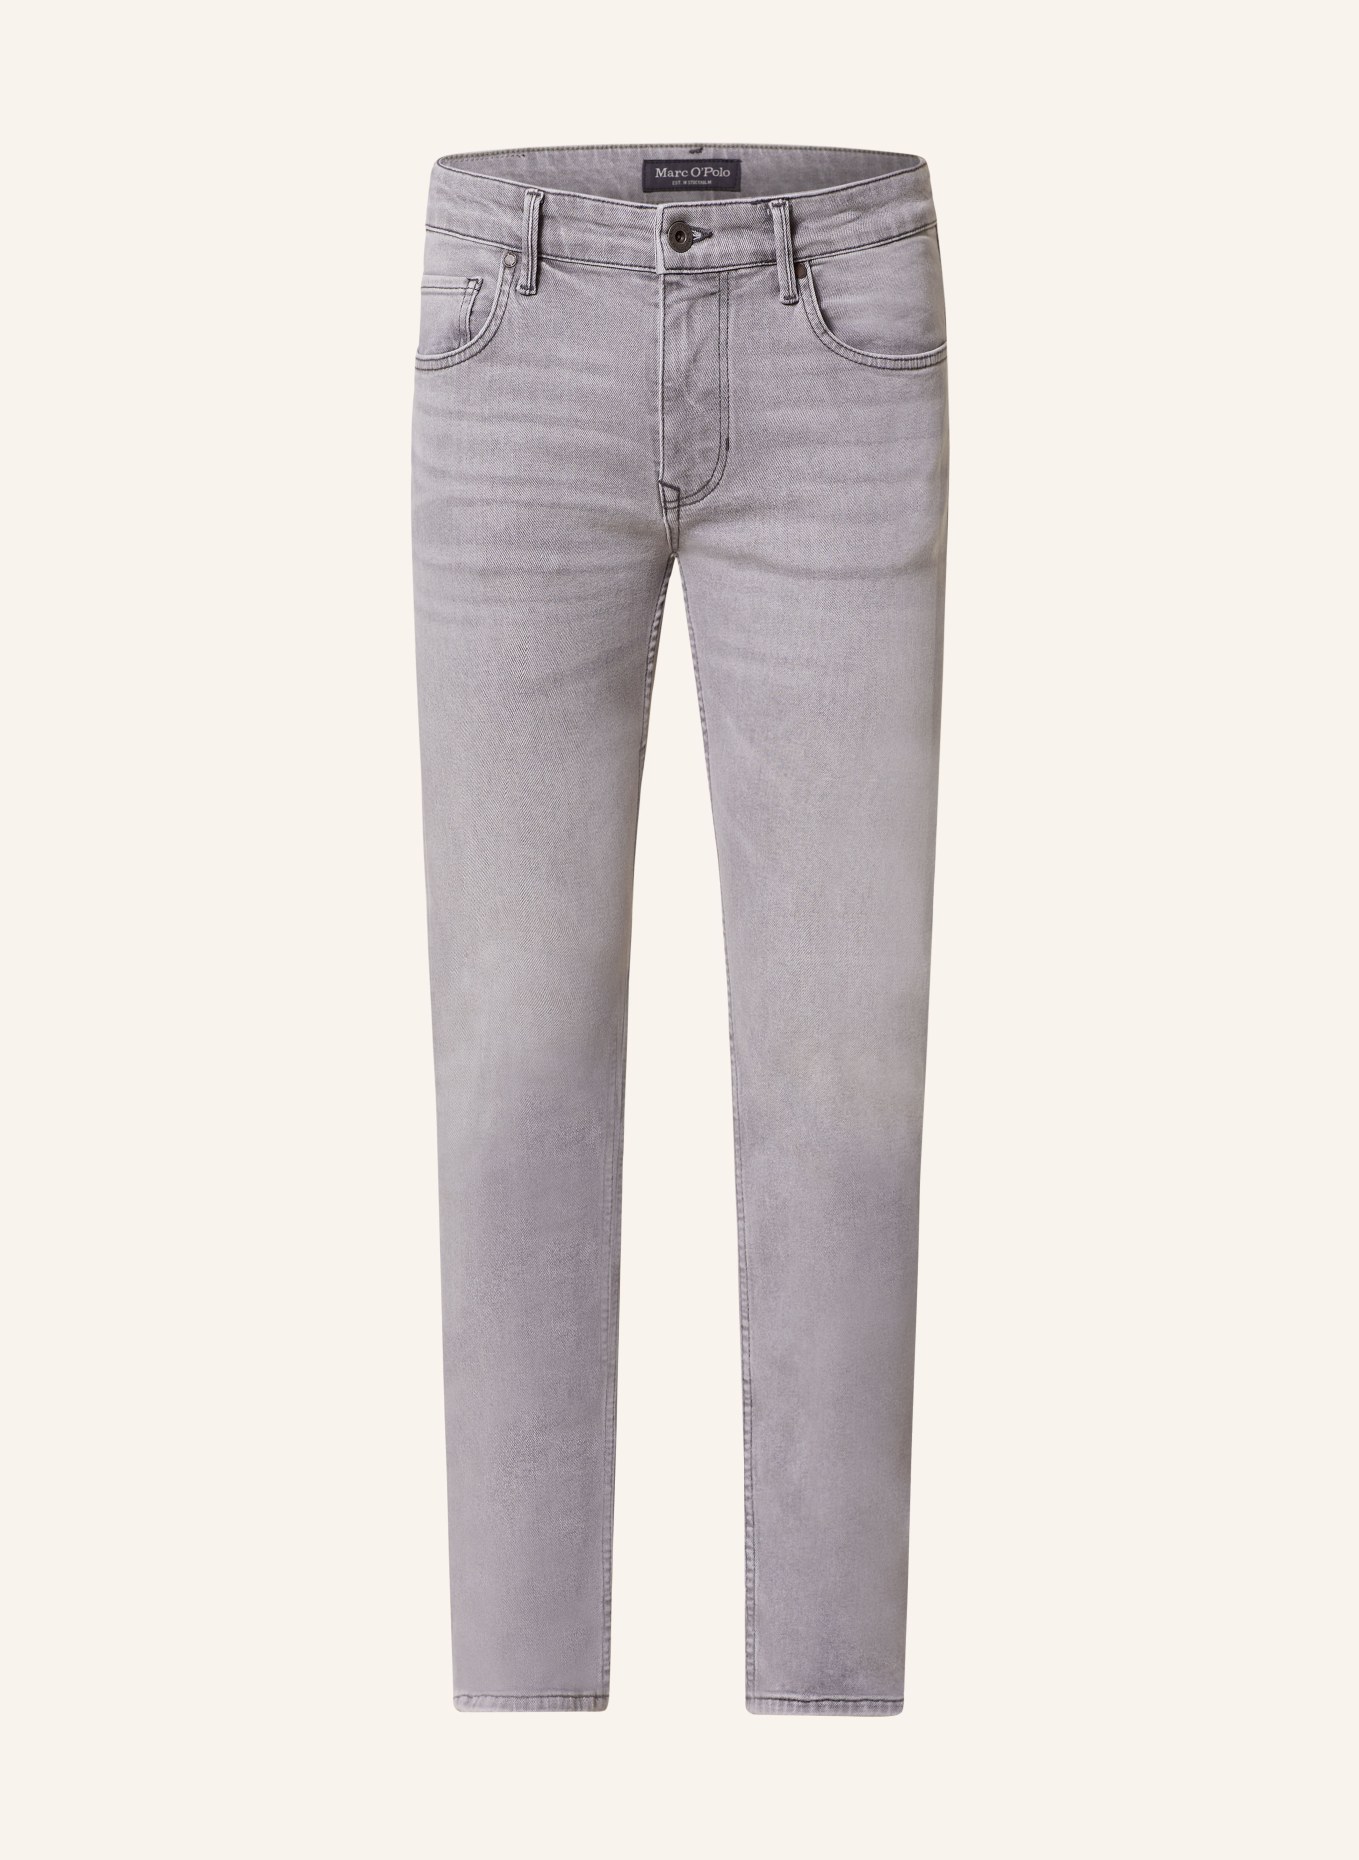 Marc O'Polo Jeans Shaped Fit, Farbe: 021 Light grey wash (Bild 1)